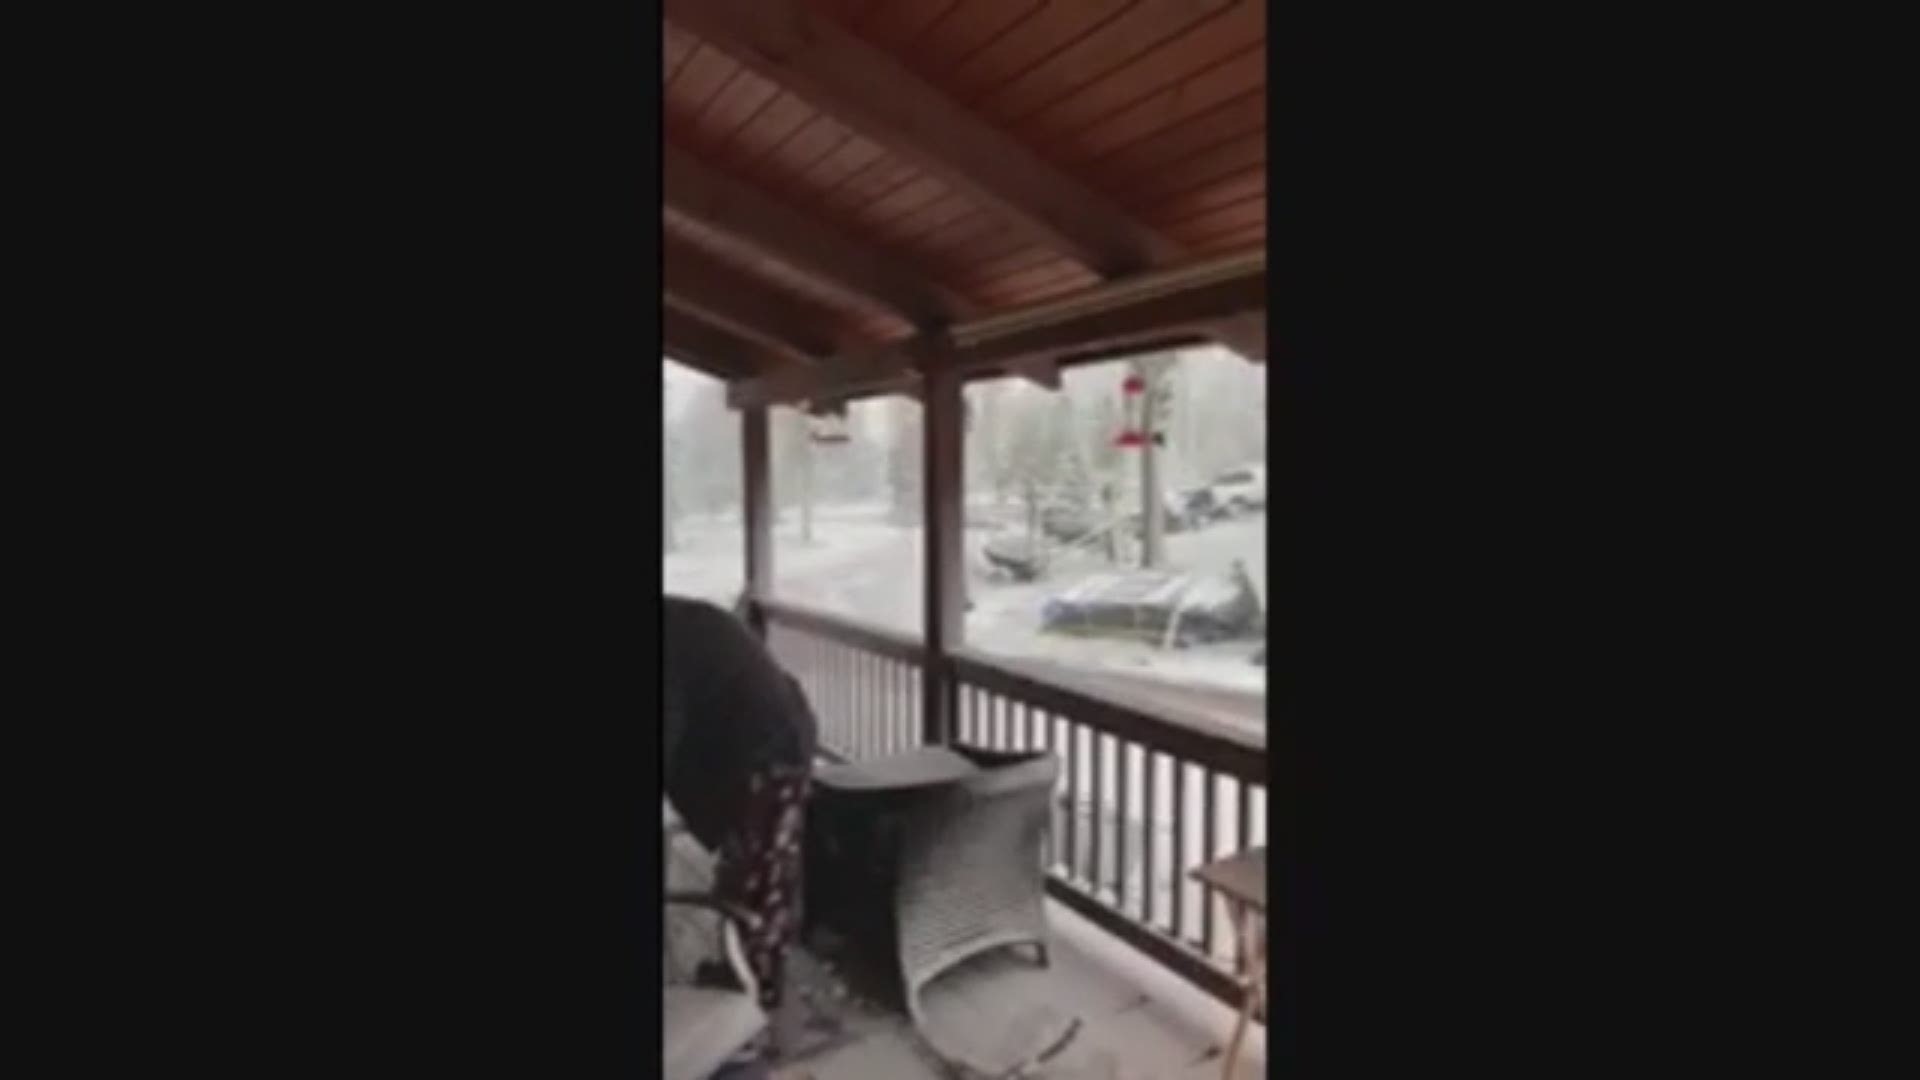 Viewer  Lala Jacoby shared this video of thunder snow in Crystal Lakes, Colorado on 6/8/20 (yes this happened in June).